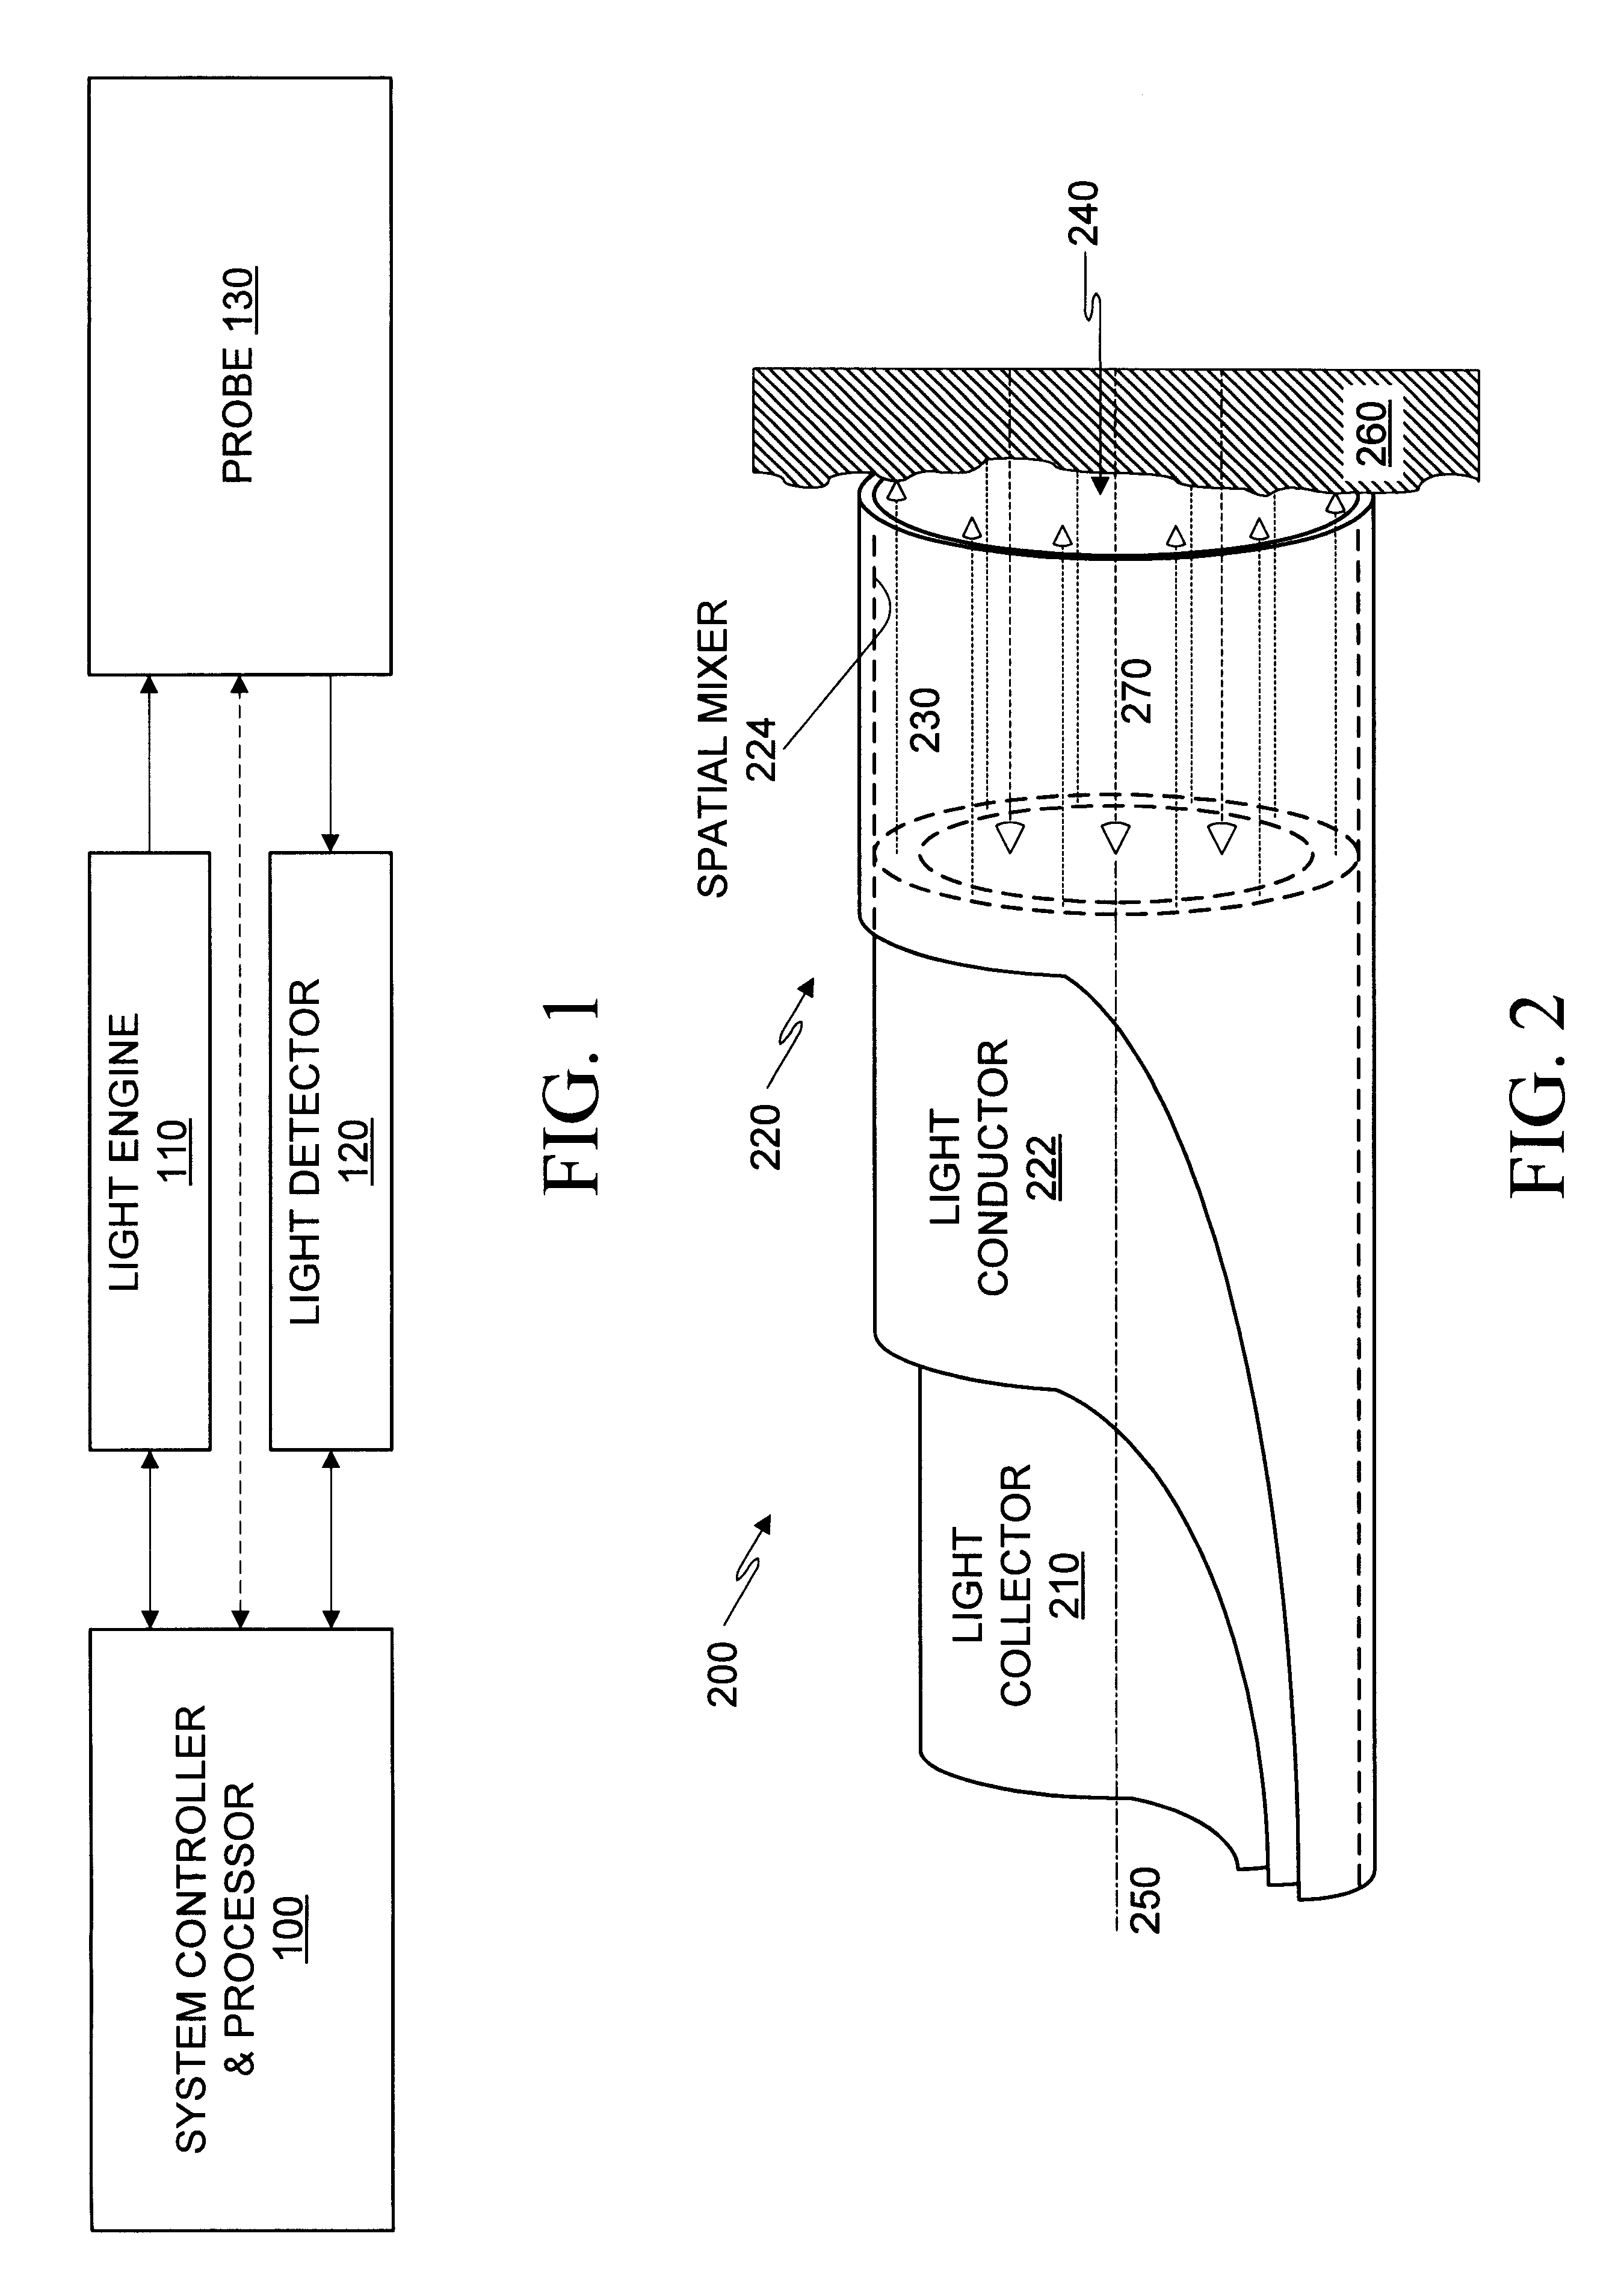 Optical probe having and methods for difuse and uniform light irradiation